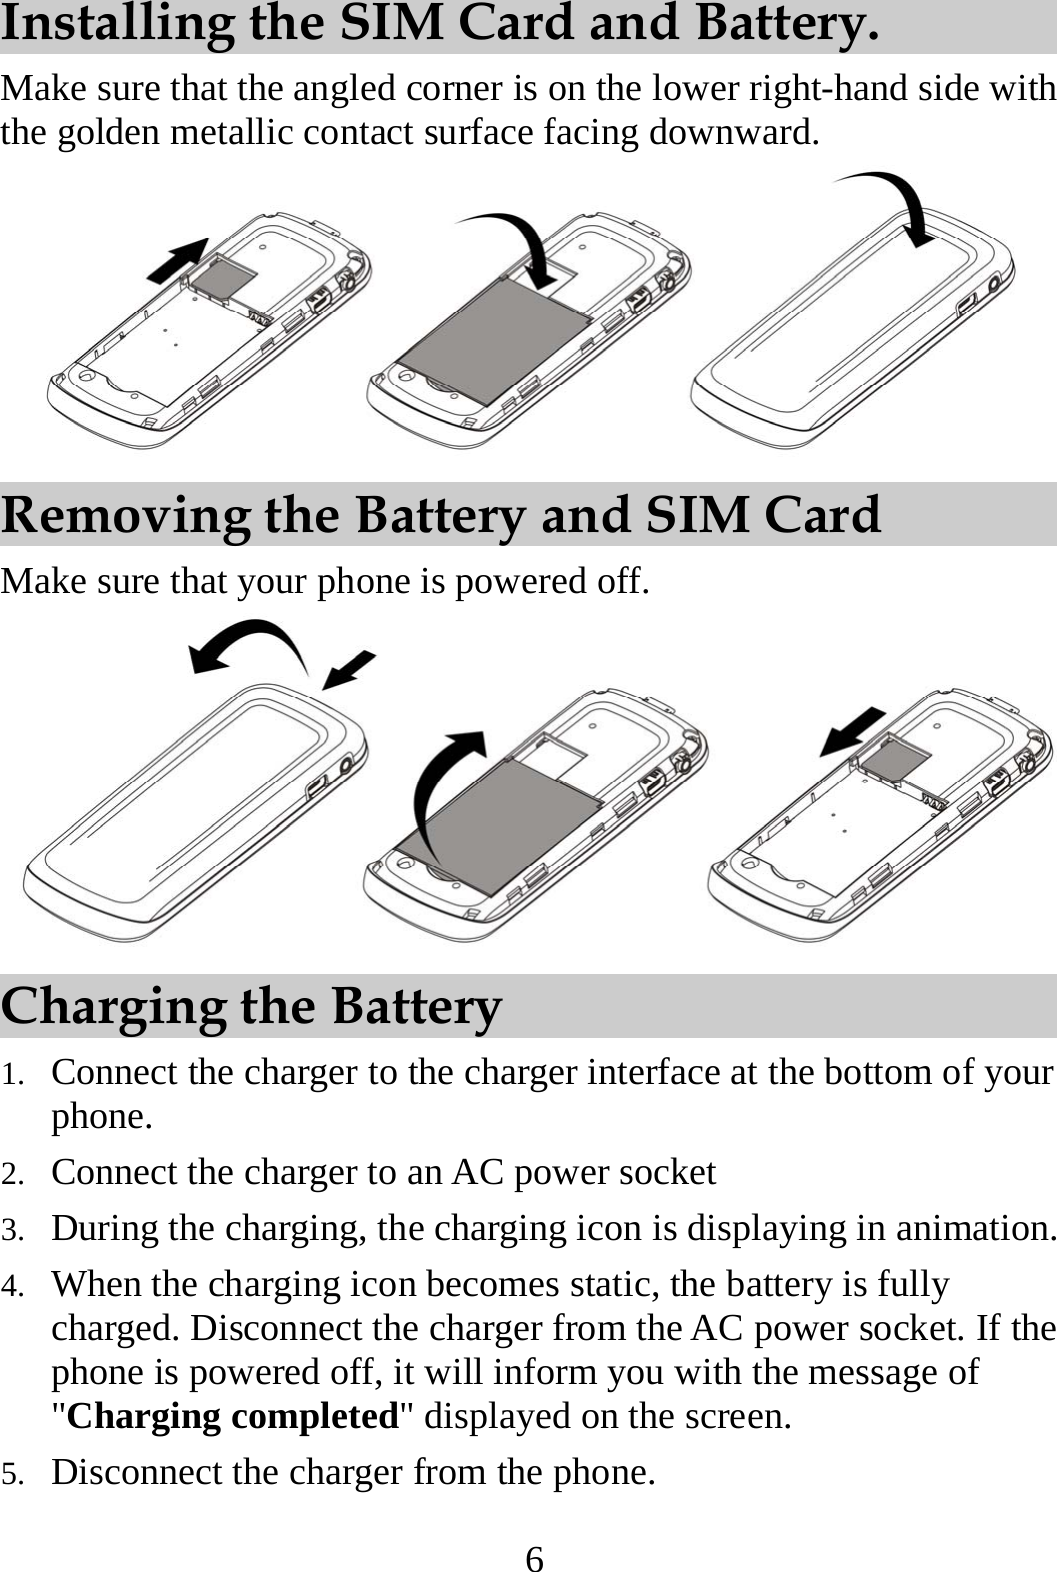 6 Installing the SIM Card and Battery. Make sure that the angled corner is on the lower right-hand side with the golden metallic contact surface facing downward.  Removing the Battery and SIM Card Make sure that your phone is powered off.  Charging the Battery 1. Connect the charger to the charger interface at the bottom of your phone. 2. Connect the charger to an AC power socket   3. During the charging, the charging icon is displaying in animation. 4. When the charging icon becomes static, the battery is fully charged. Disconnect the charger from the AC power socket. If the phone is powered off, it will inform you with the message of &quot;Charging completed&quot; displayed on the screen. 5. Disconnect the charger from the phone. 